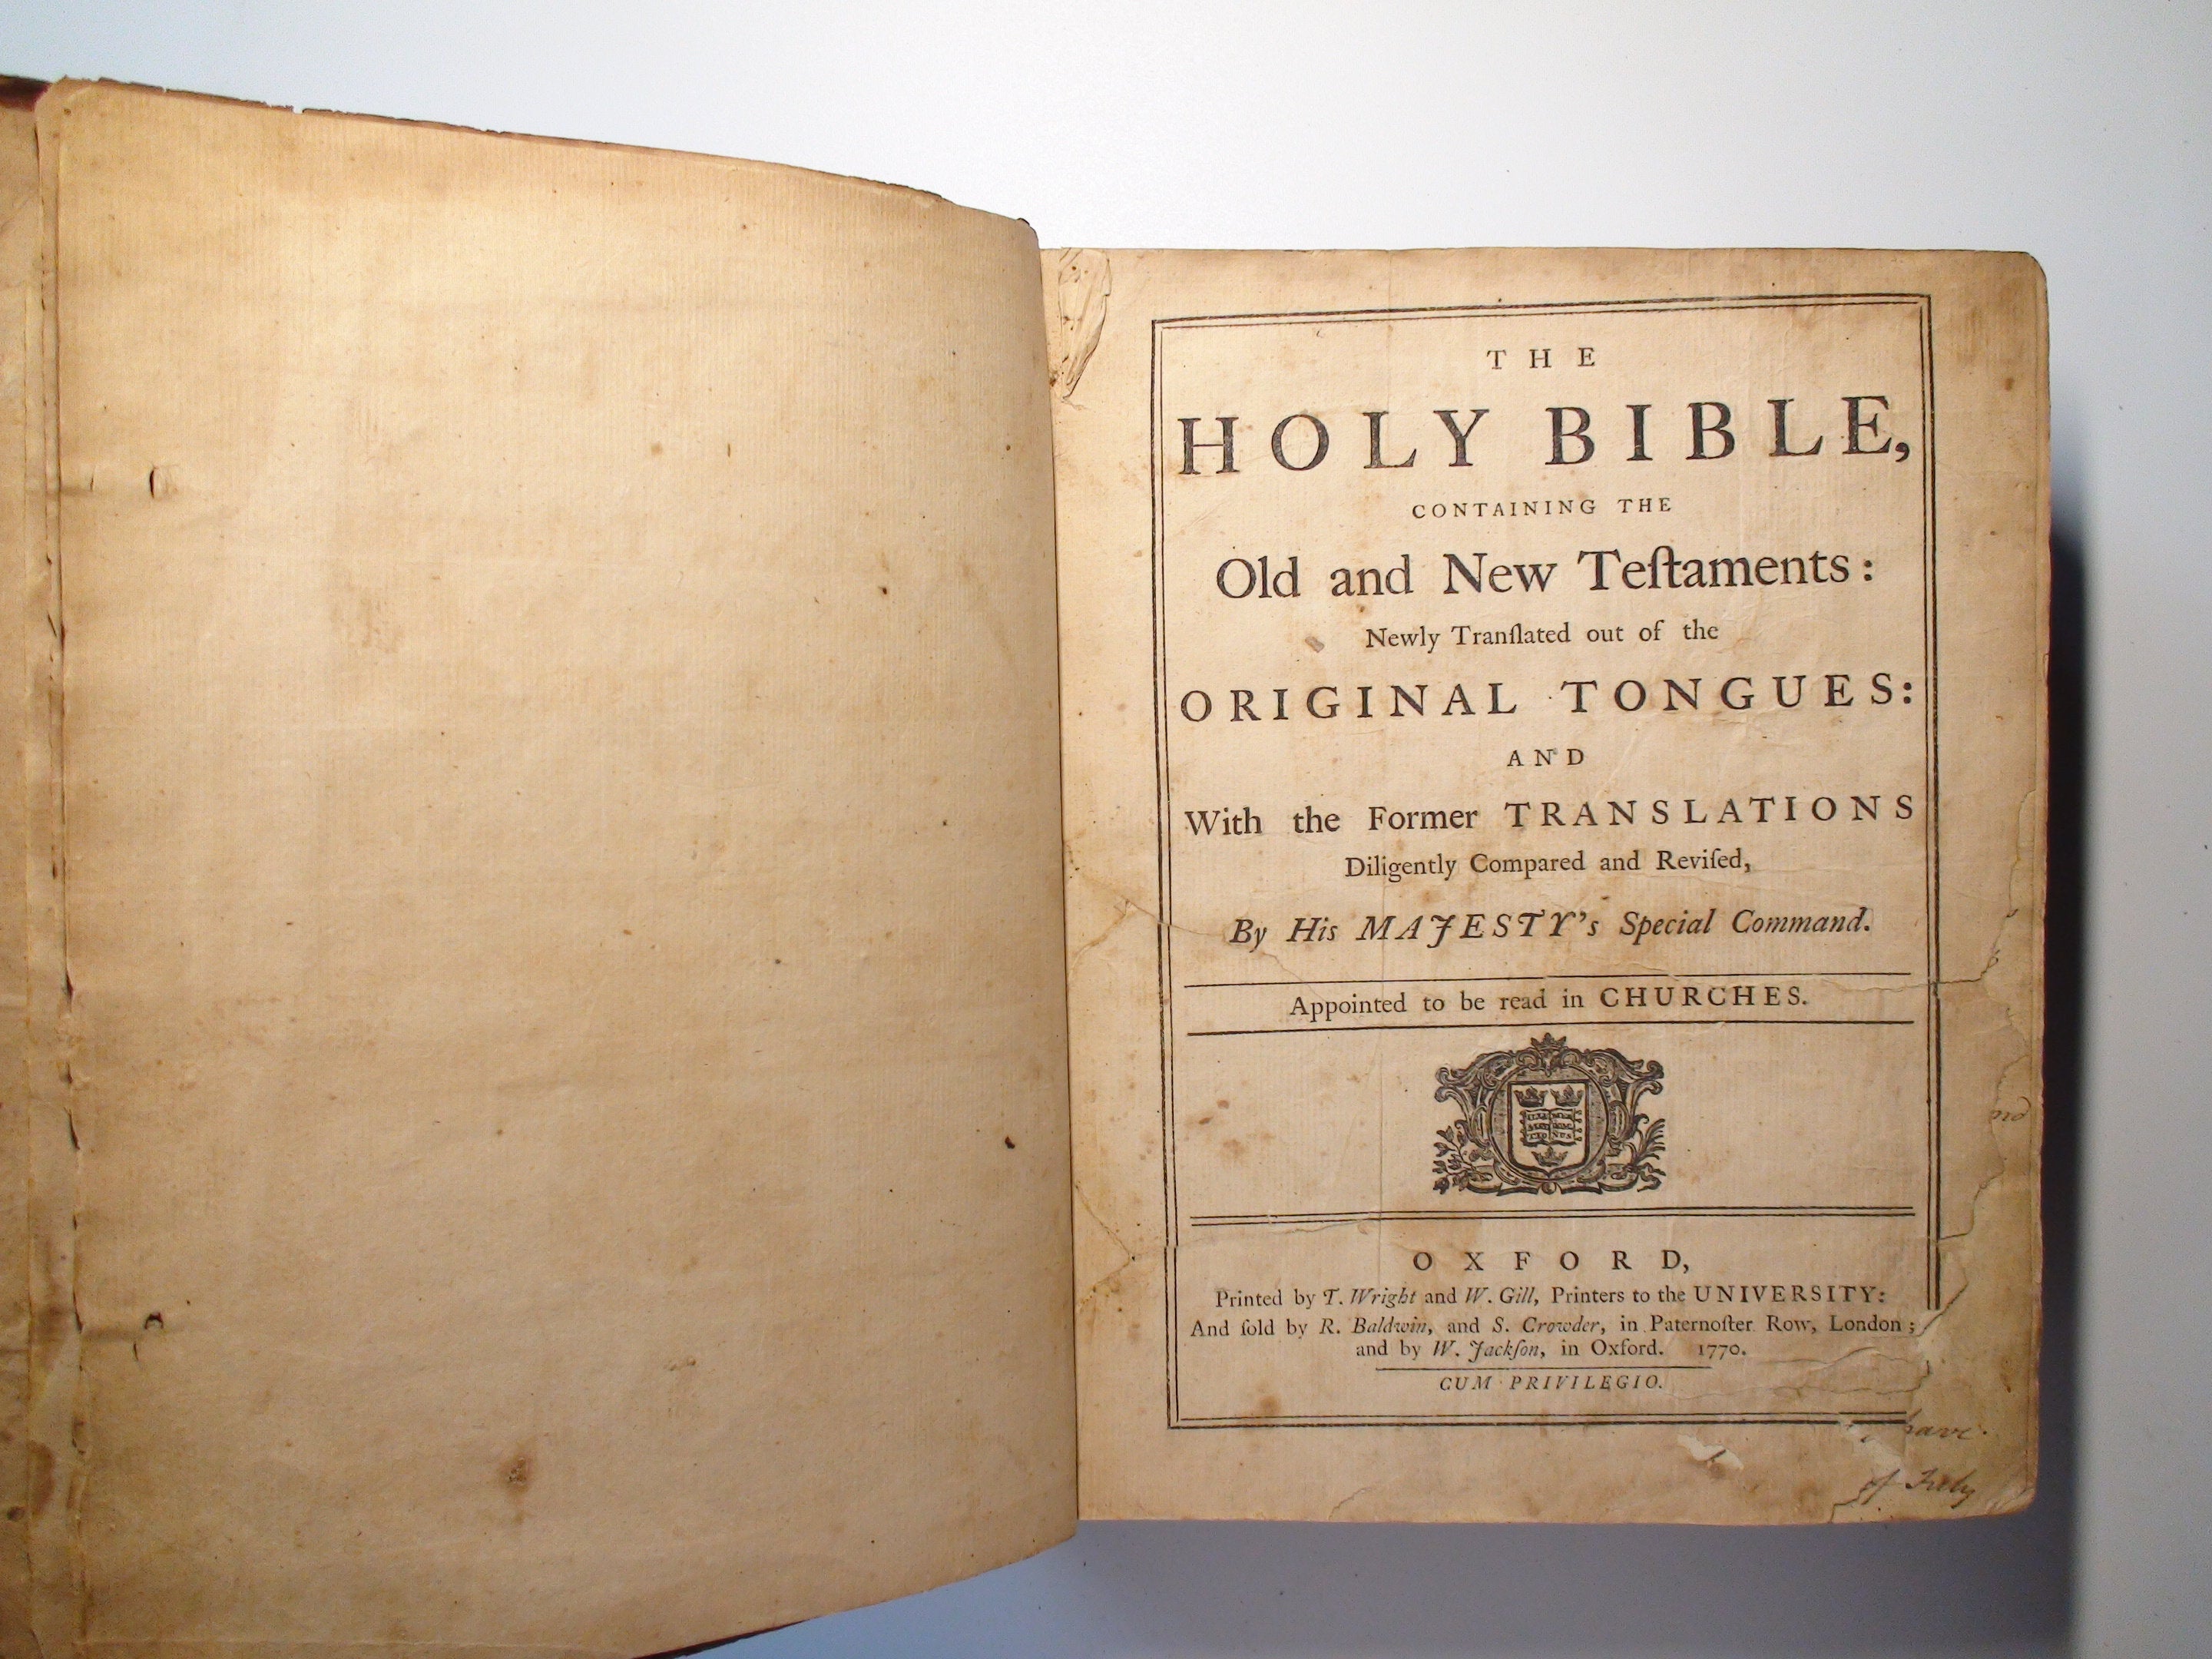 The Holy Bible, Old and New Testament, T. Wright & W. Gill, Leather, Rare, 1770